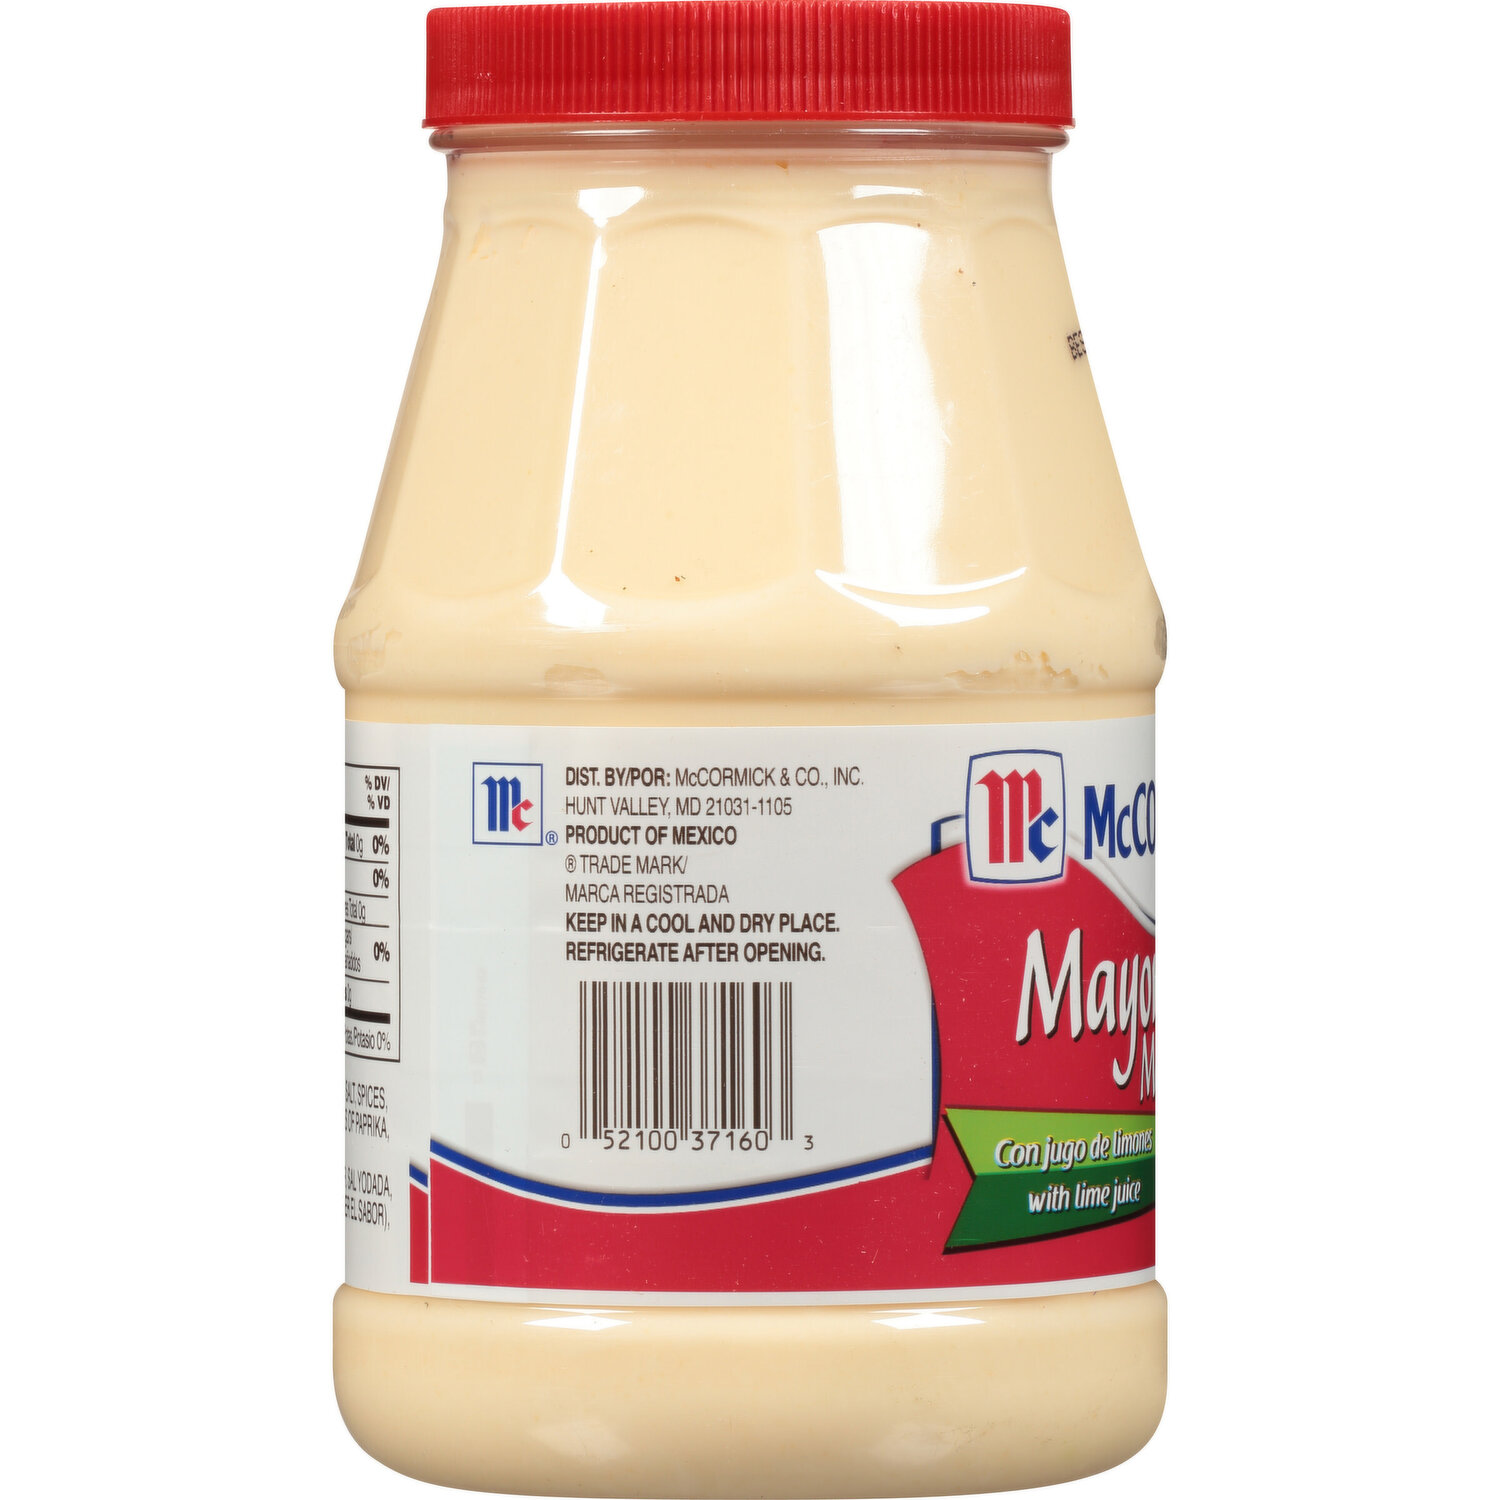 El Mariachi Market - Mayonesa McCormick, is the #1 brand of mayonnaise in  Mexico, makes every dish you prepare for your family even more delicious.  Shop at elmariachimarket.com #elmariachimarket #vancouver #canada #mexico #